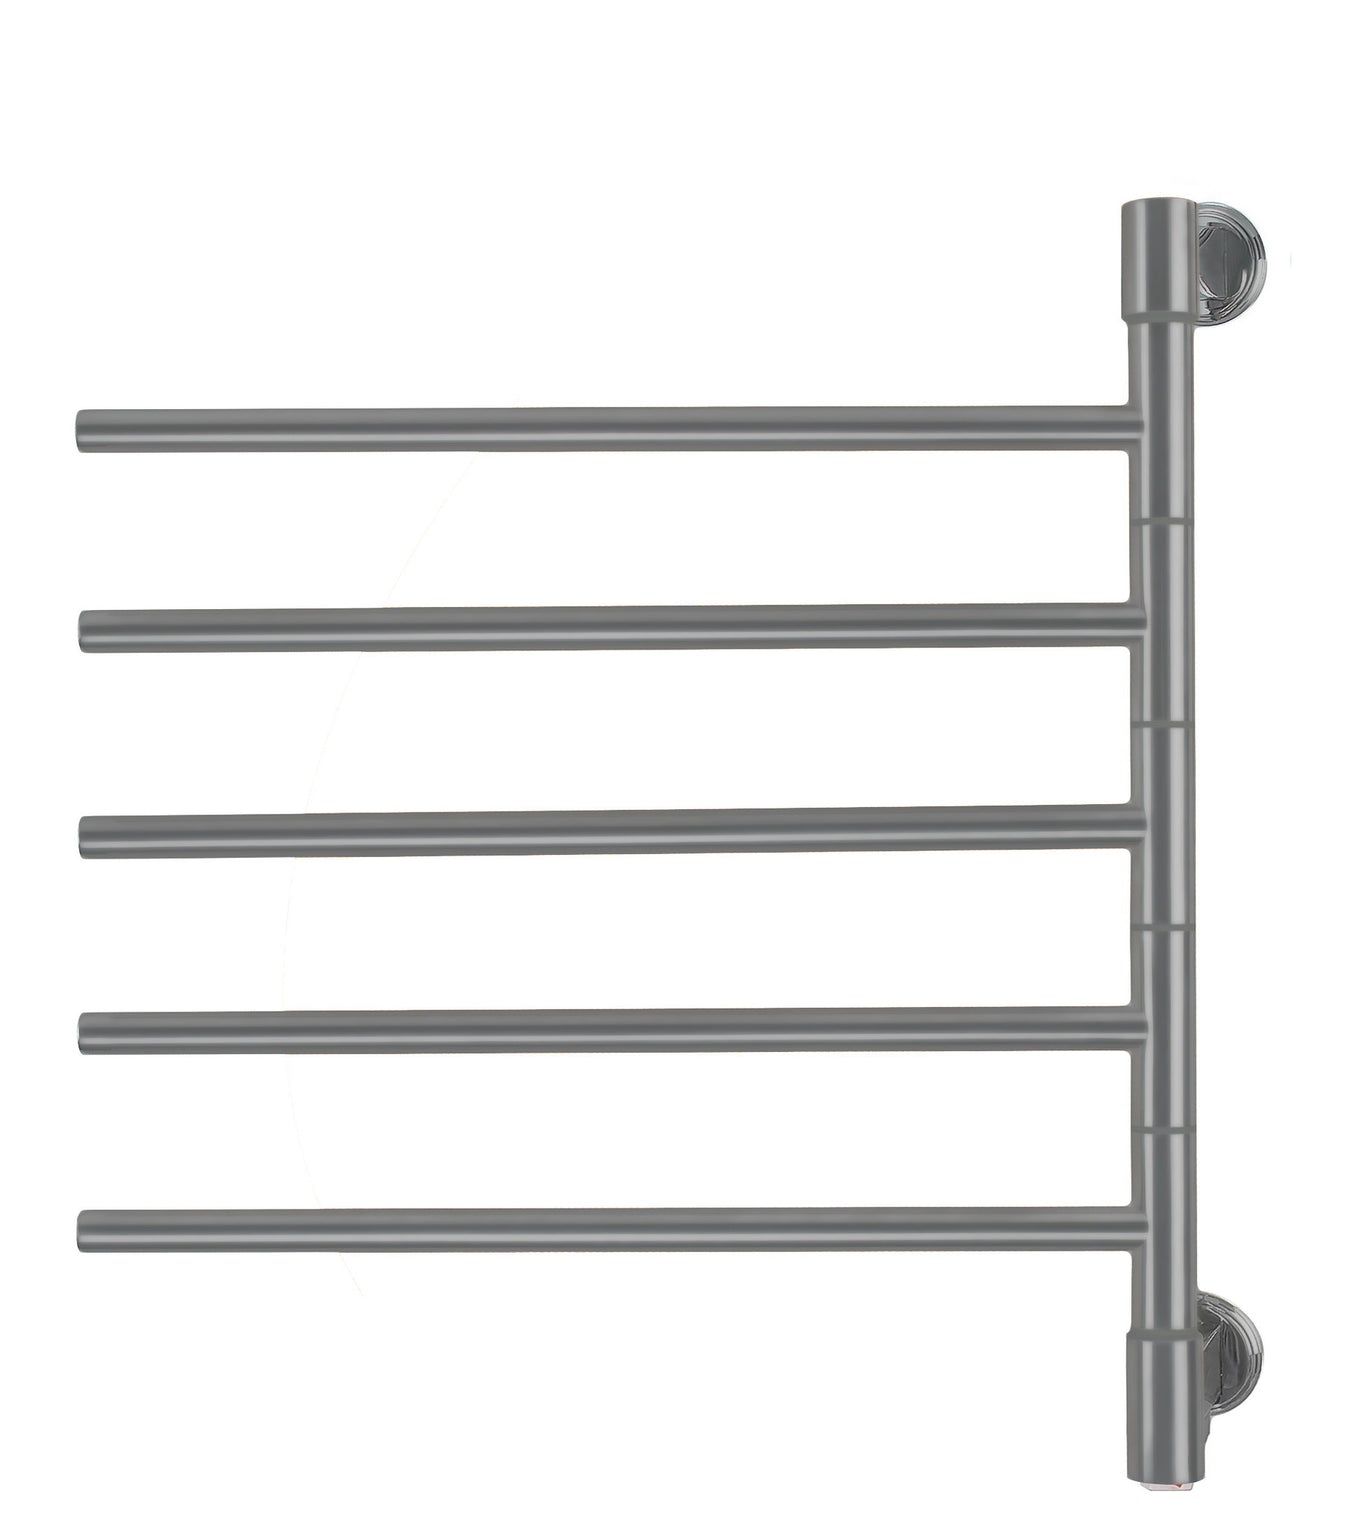 Amba Products Swivel Collection Jack D005 Towel Warmers